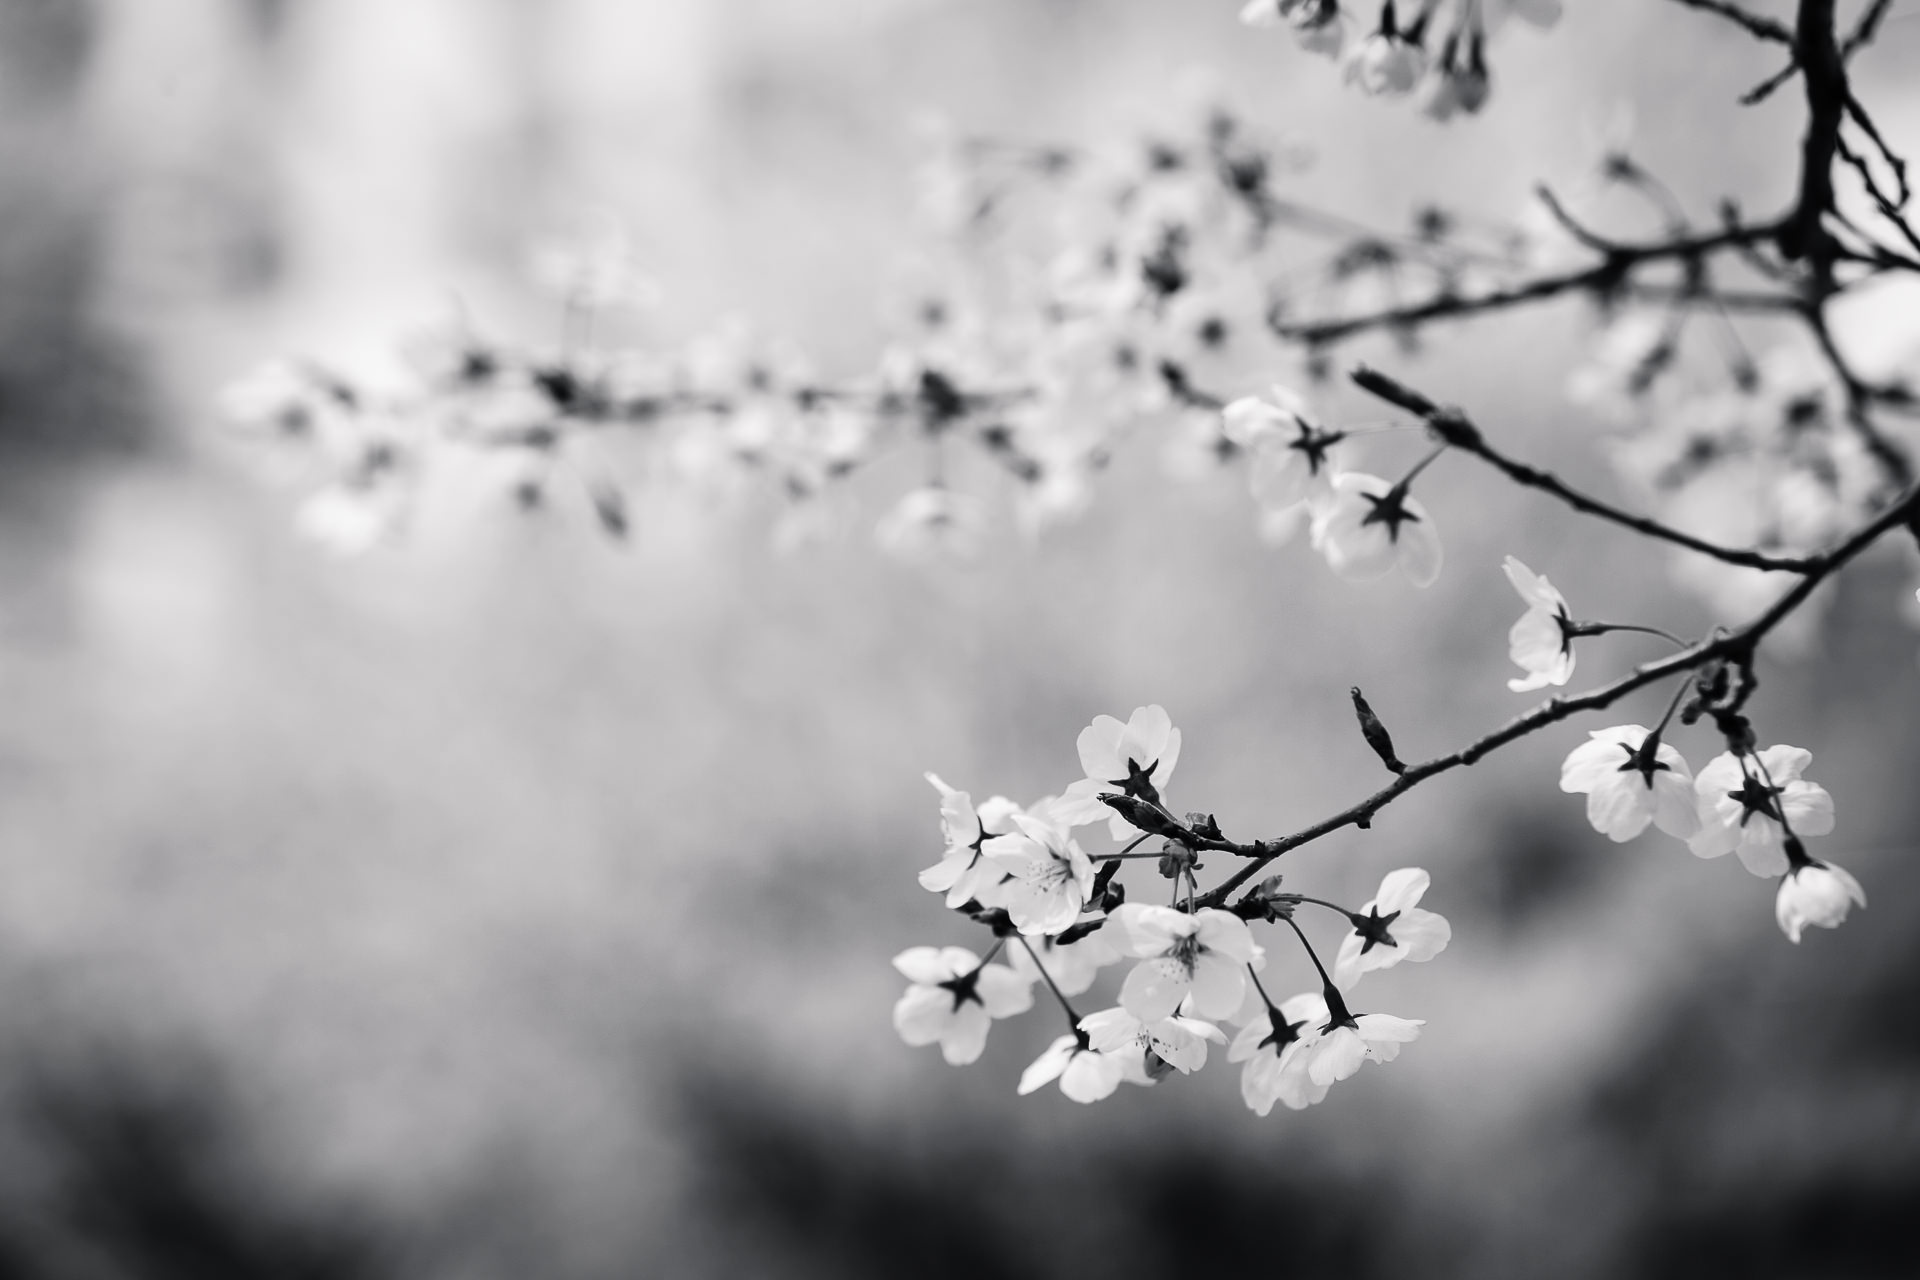 Free Images : tree, branch, winter, black and white, plant, sunlight ...